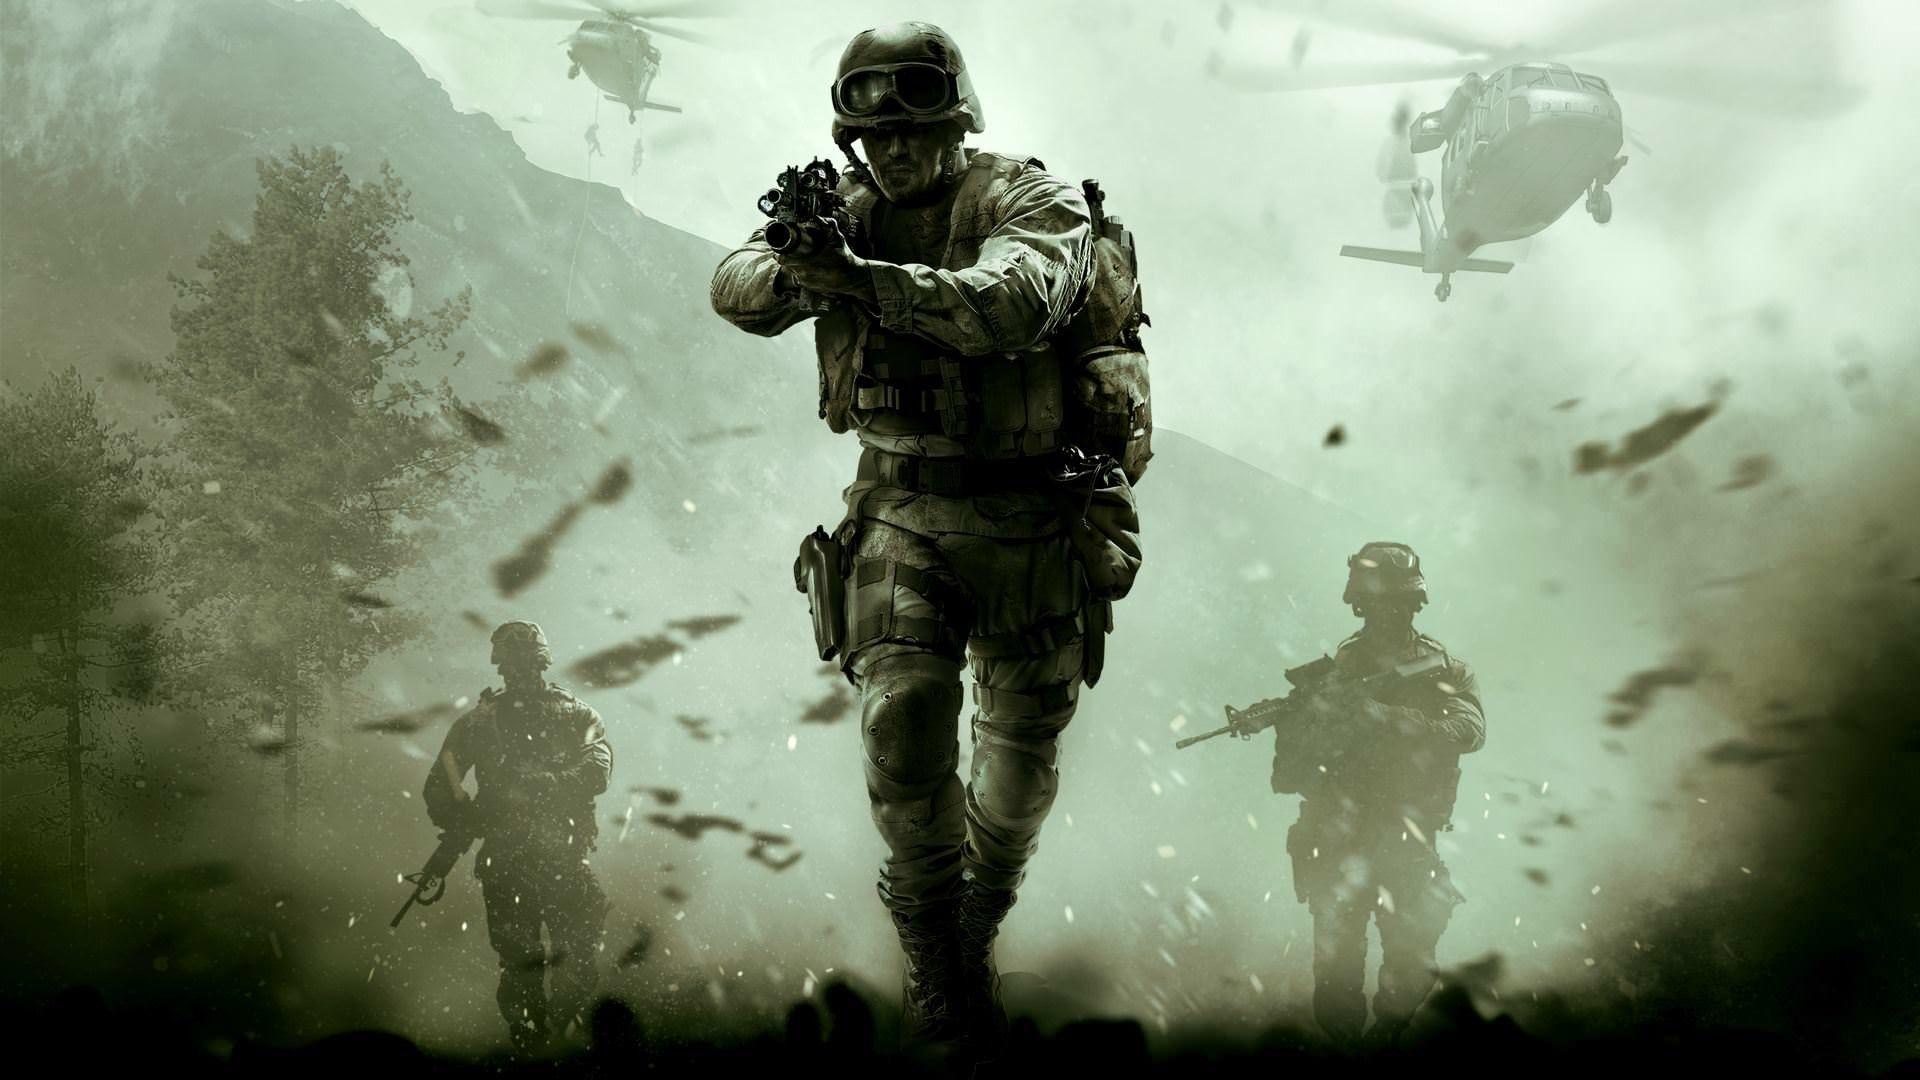 4K Call of Duty Wallpaper Free 4K Call of Duty Background